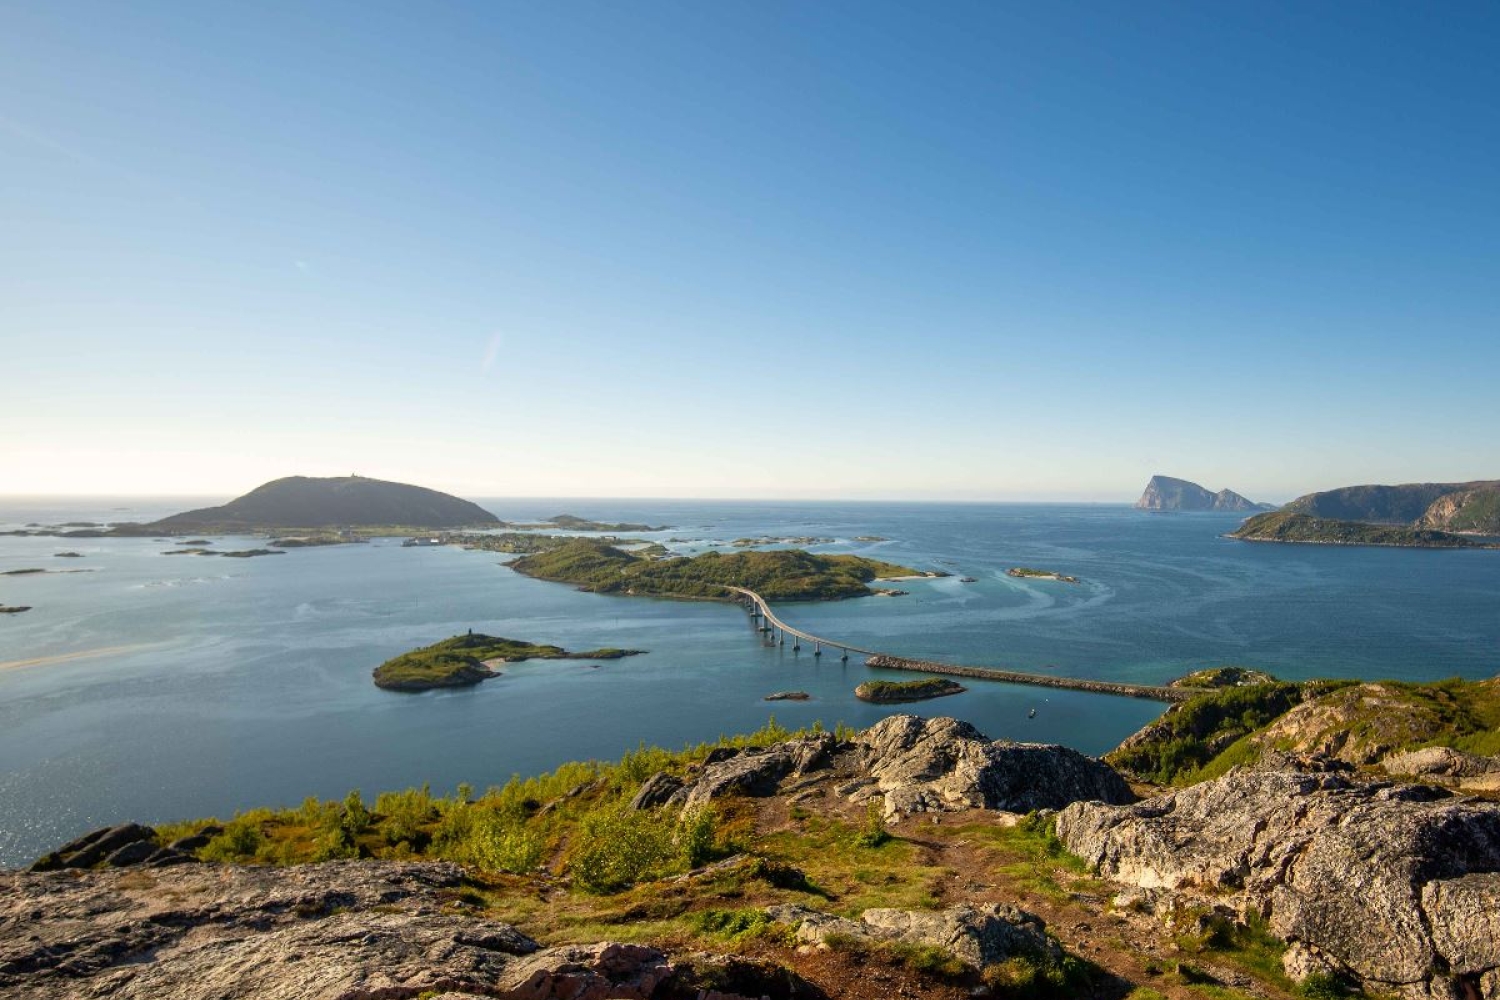 The view of Sommarøy, Hillesøy and Håja